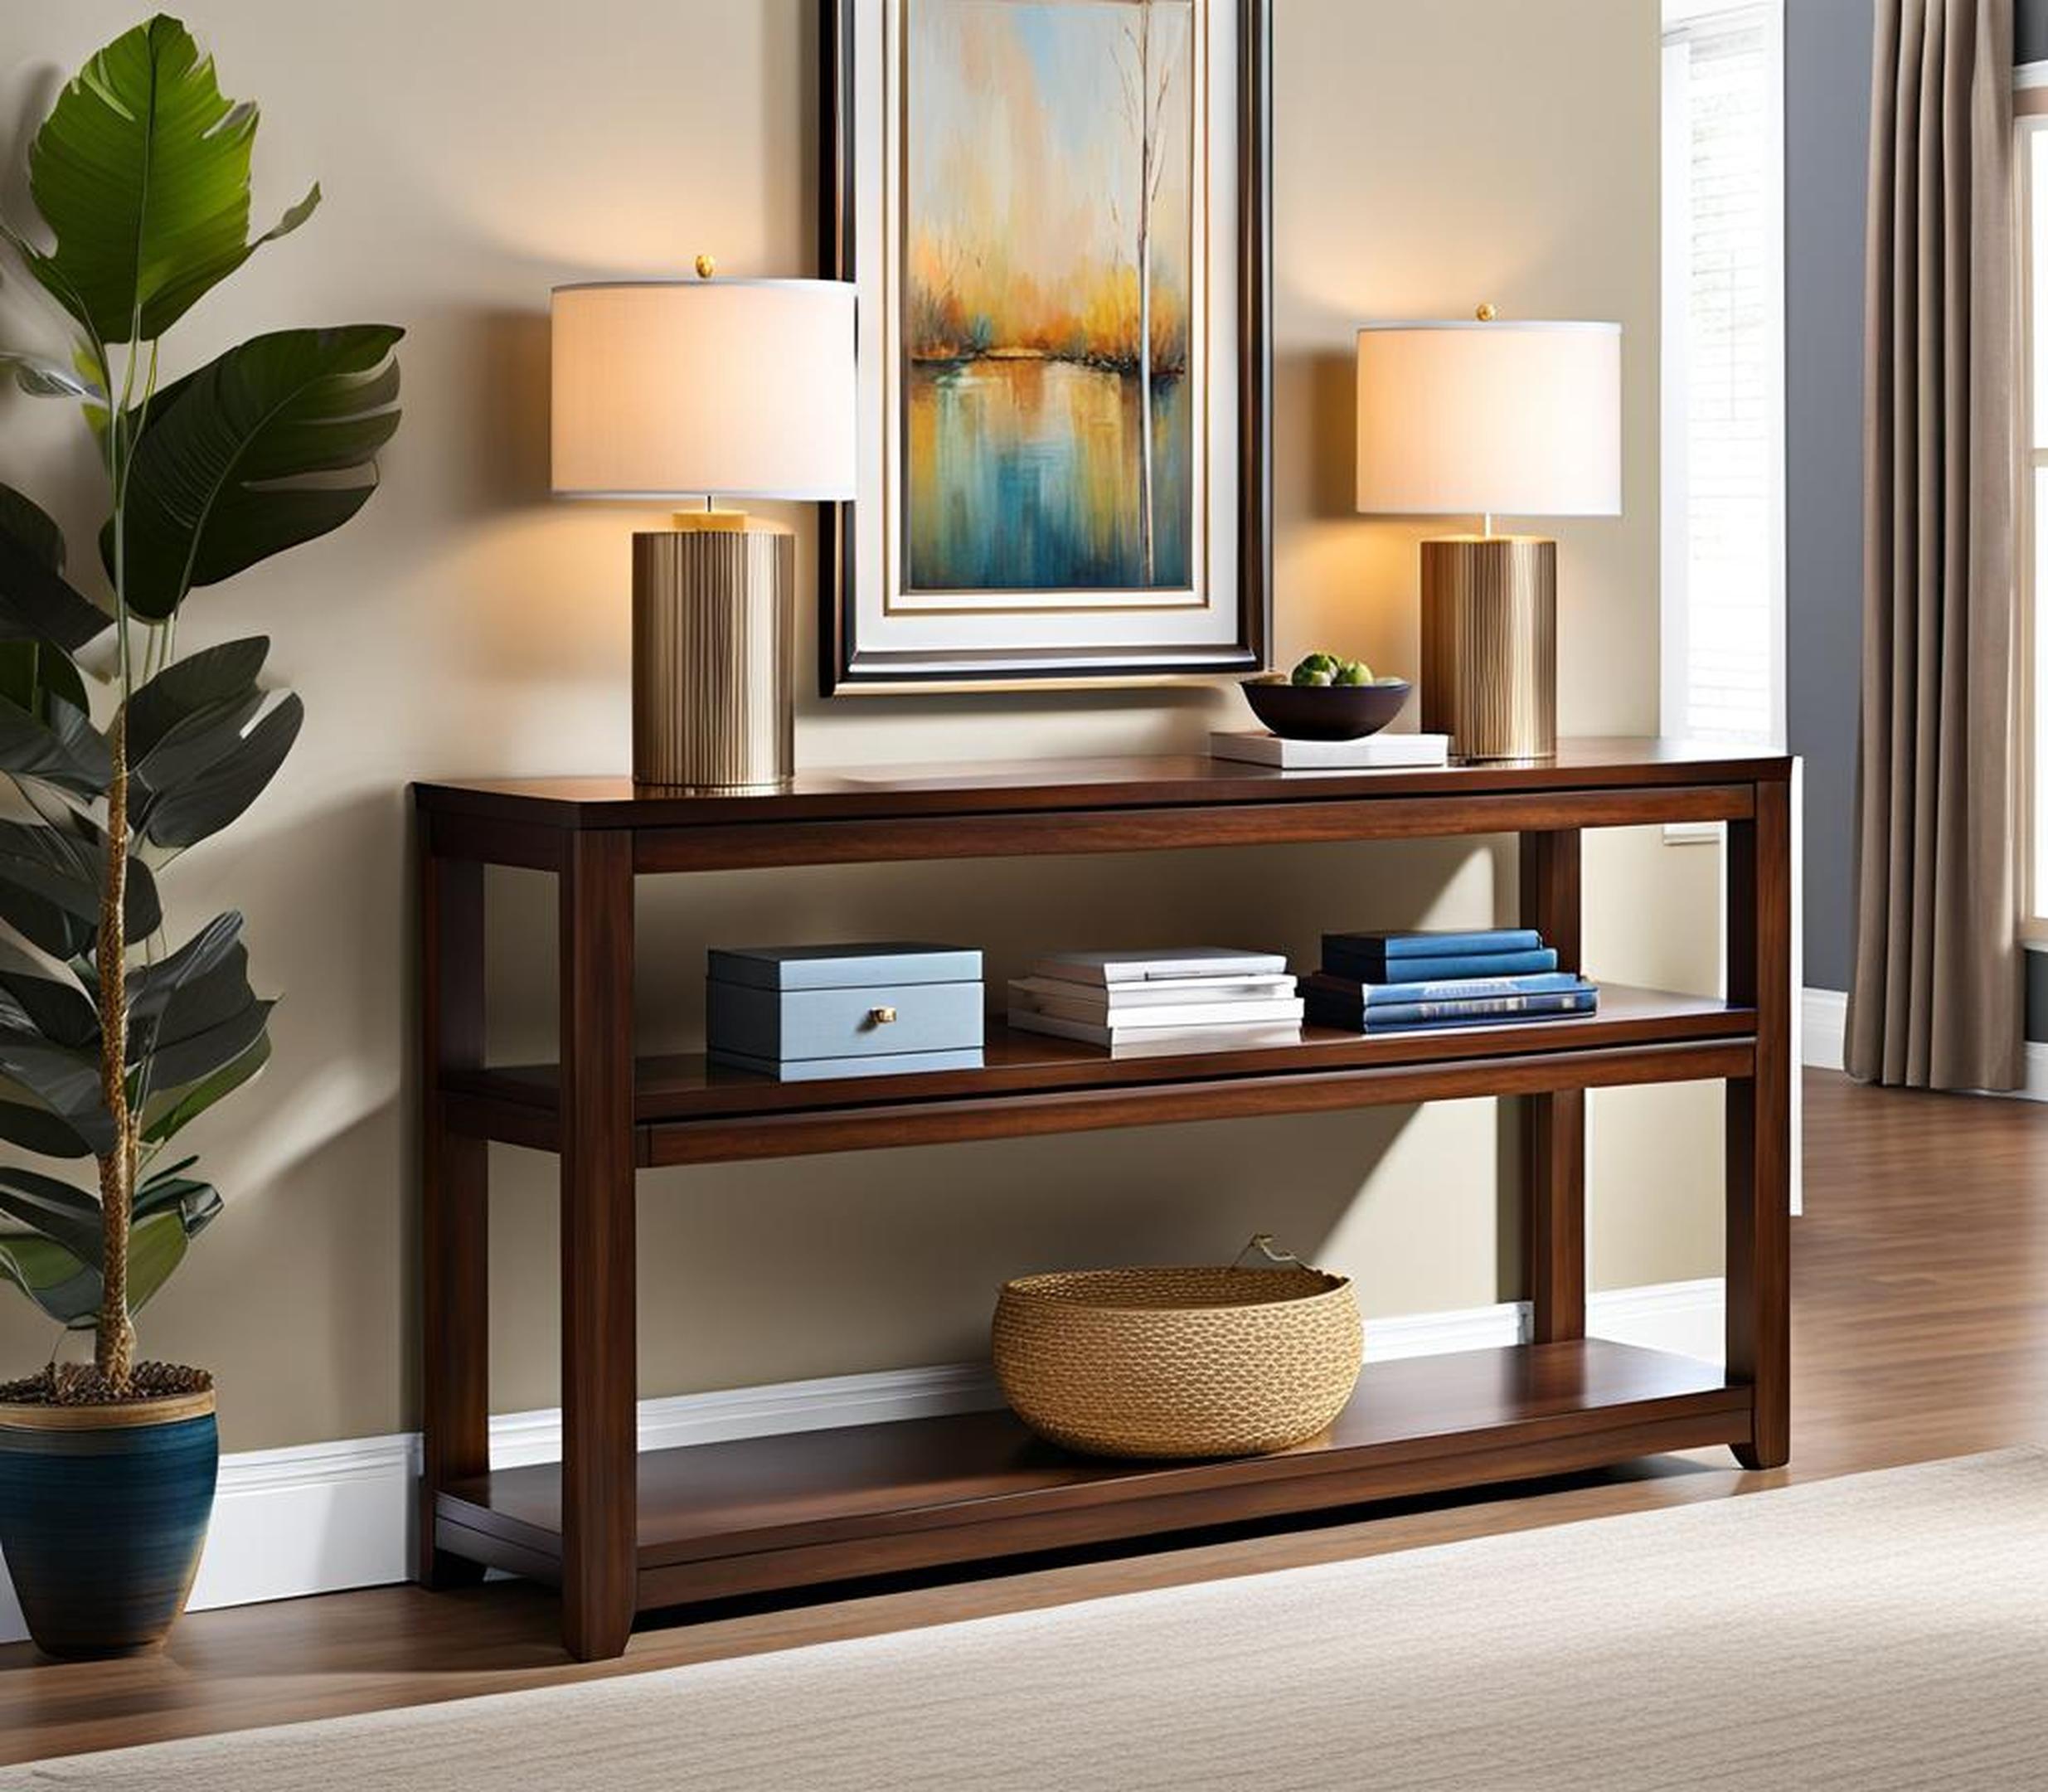 12 inch deep console table